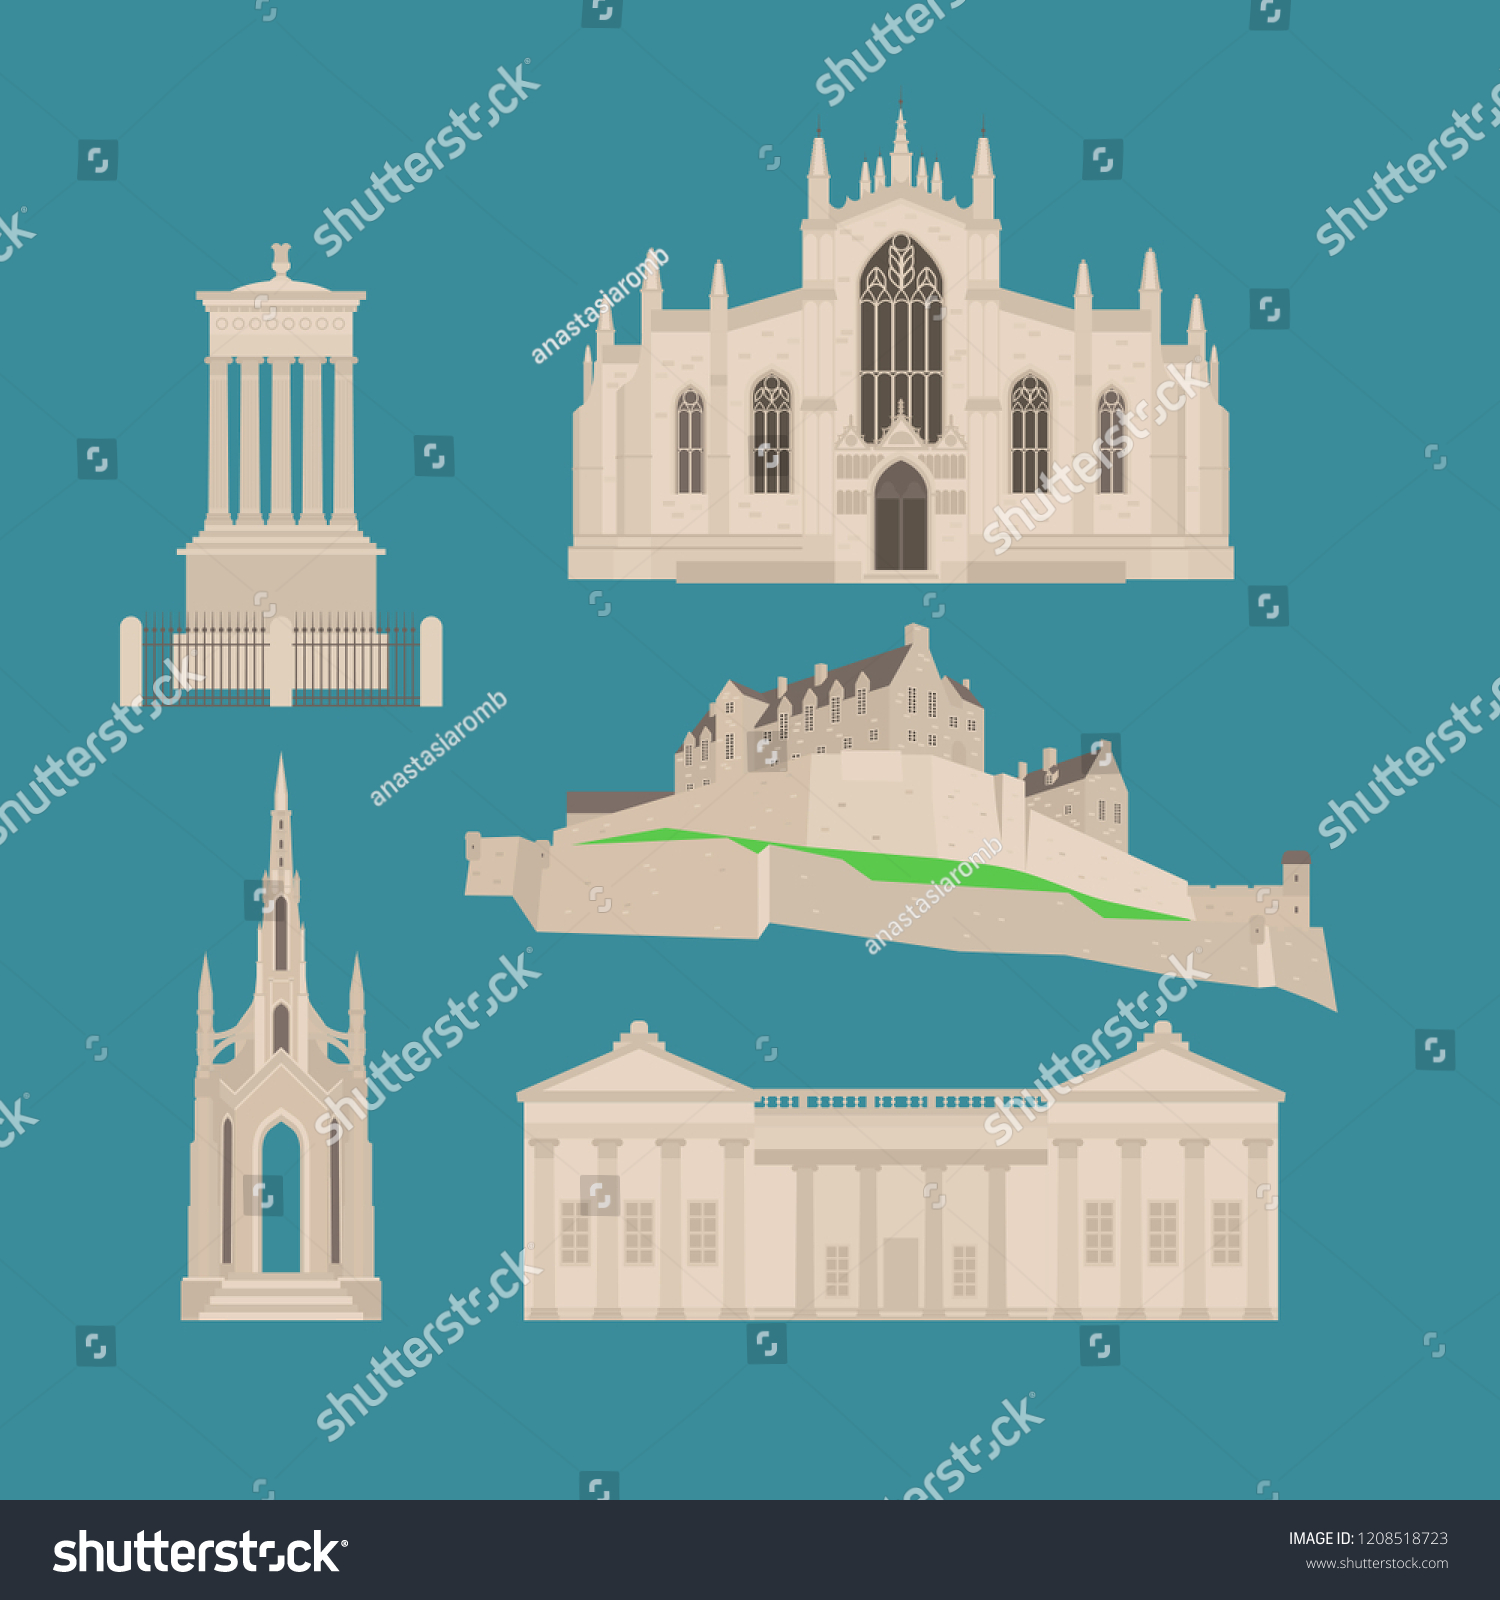 SVG of Flat building in Scotland, United Kingdom. Sightseeing and landmark. Architecture of Great Britain. St Giles Cathedral and Edinburgh Castle. Dugald Stewart, Scott Walter Monument vector illustration svg